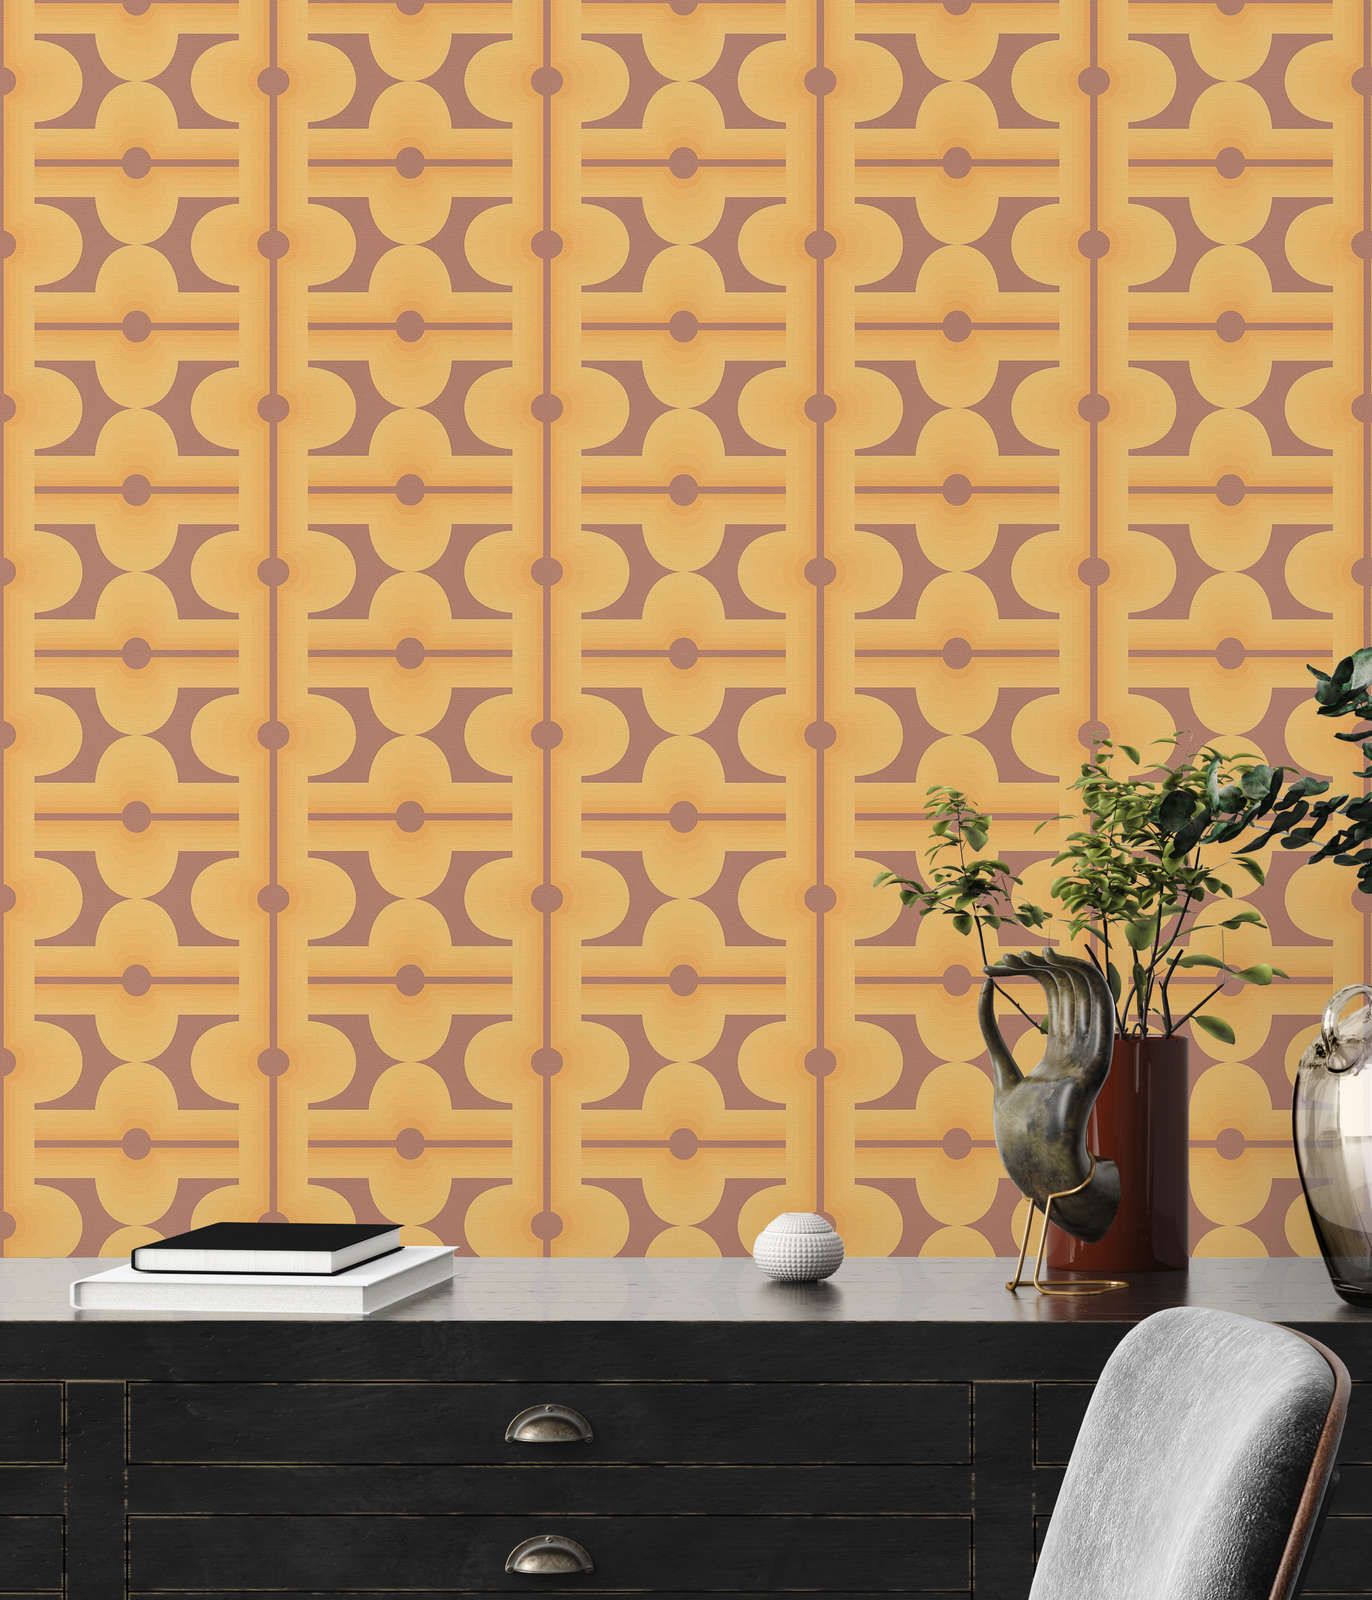             Abstract patterns on 70s non-woven wallpaper in warm colours - brown, yellow, orange
        